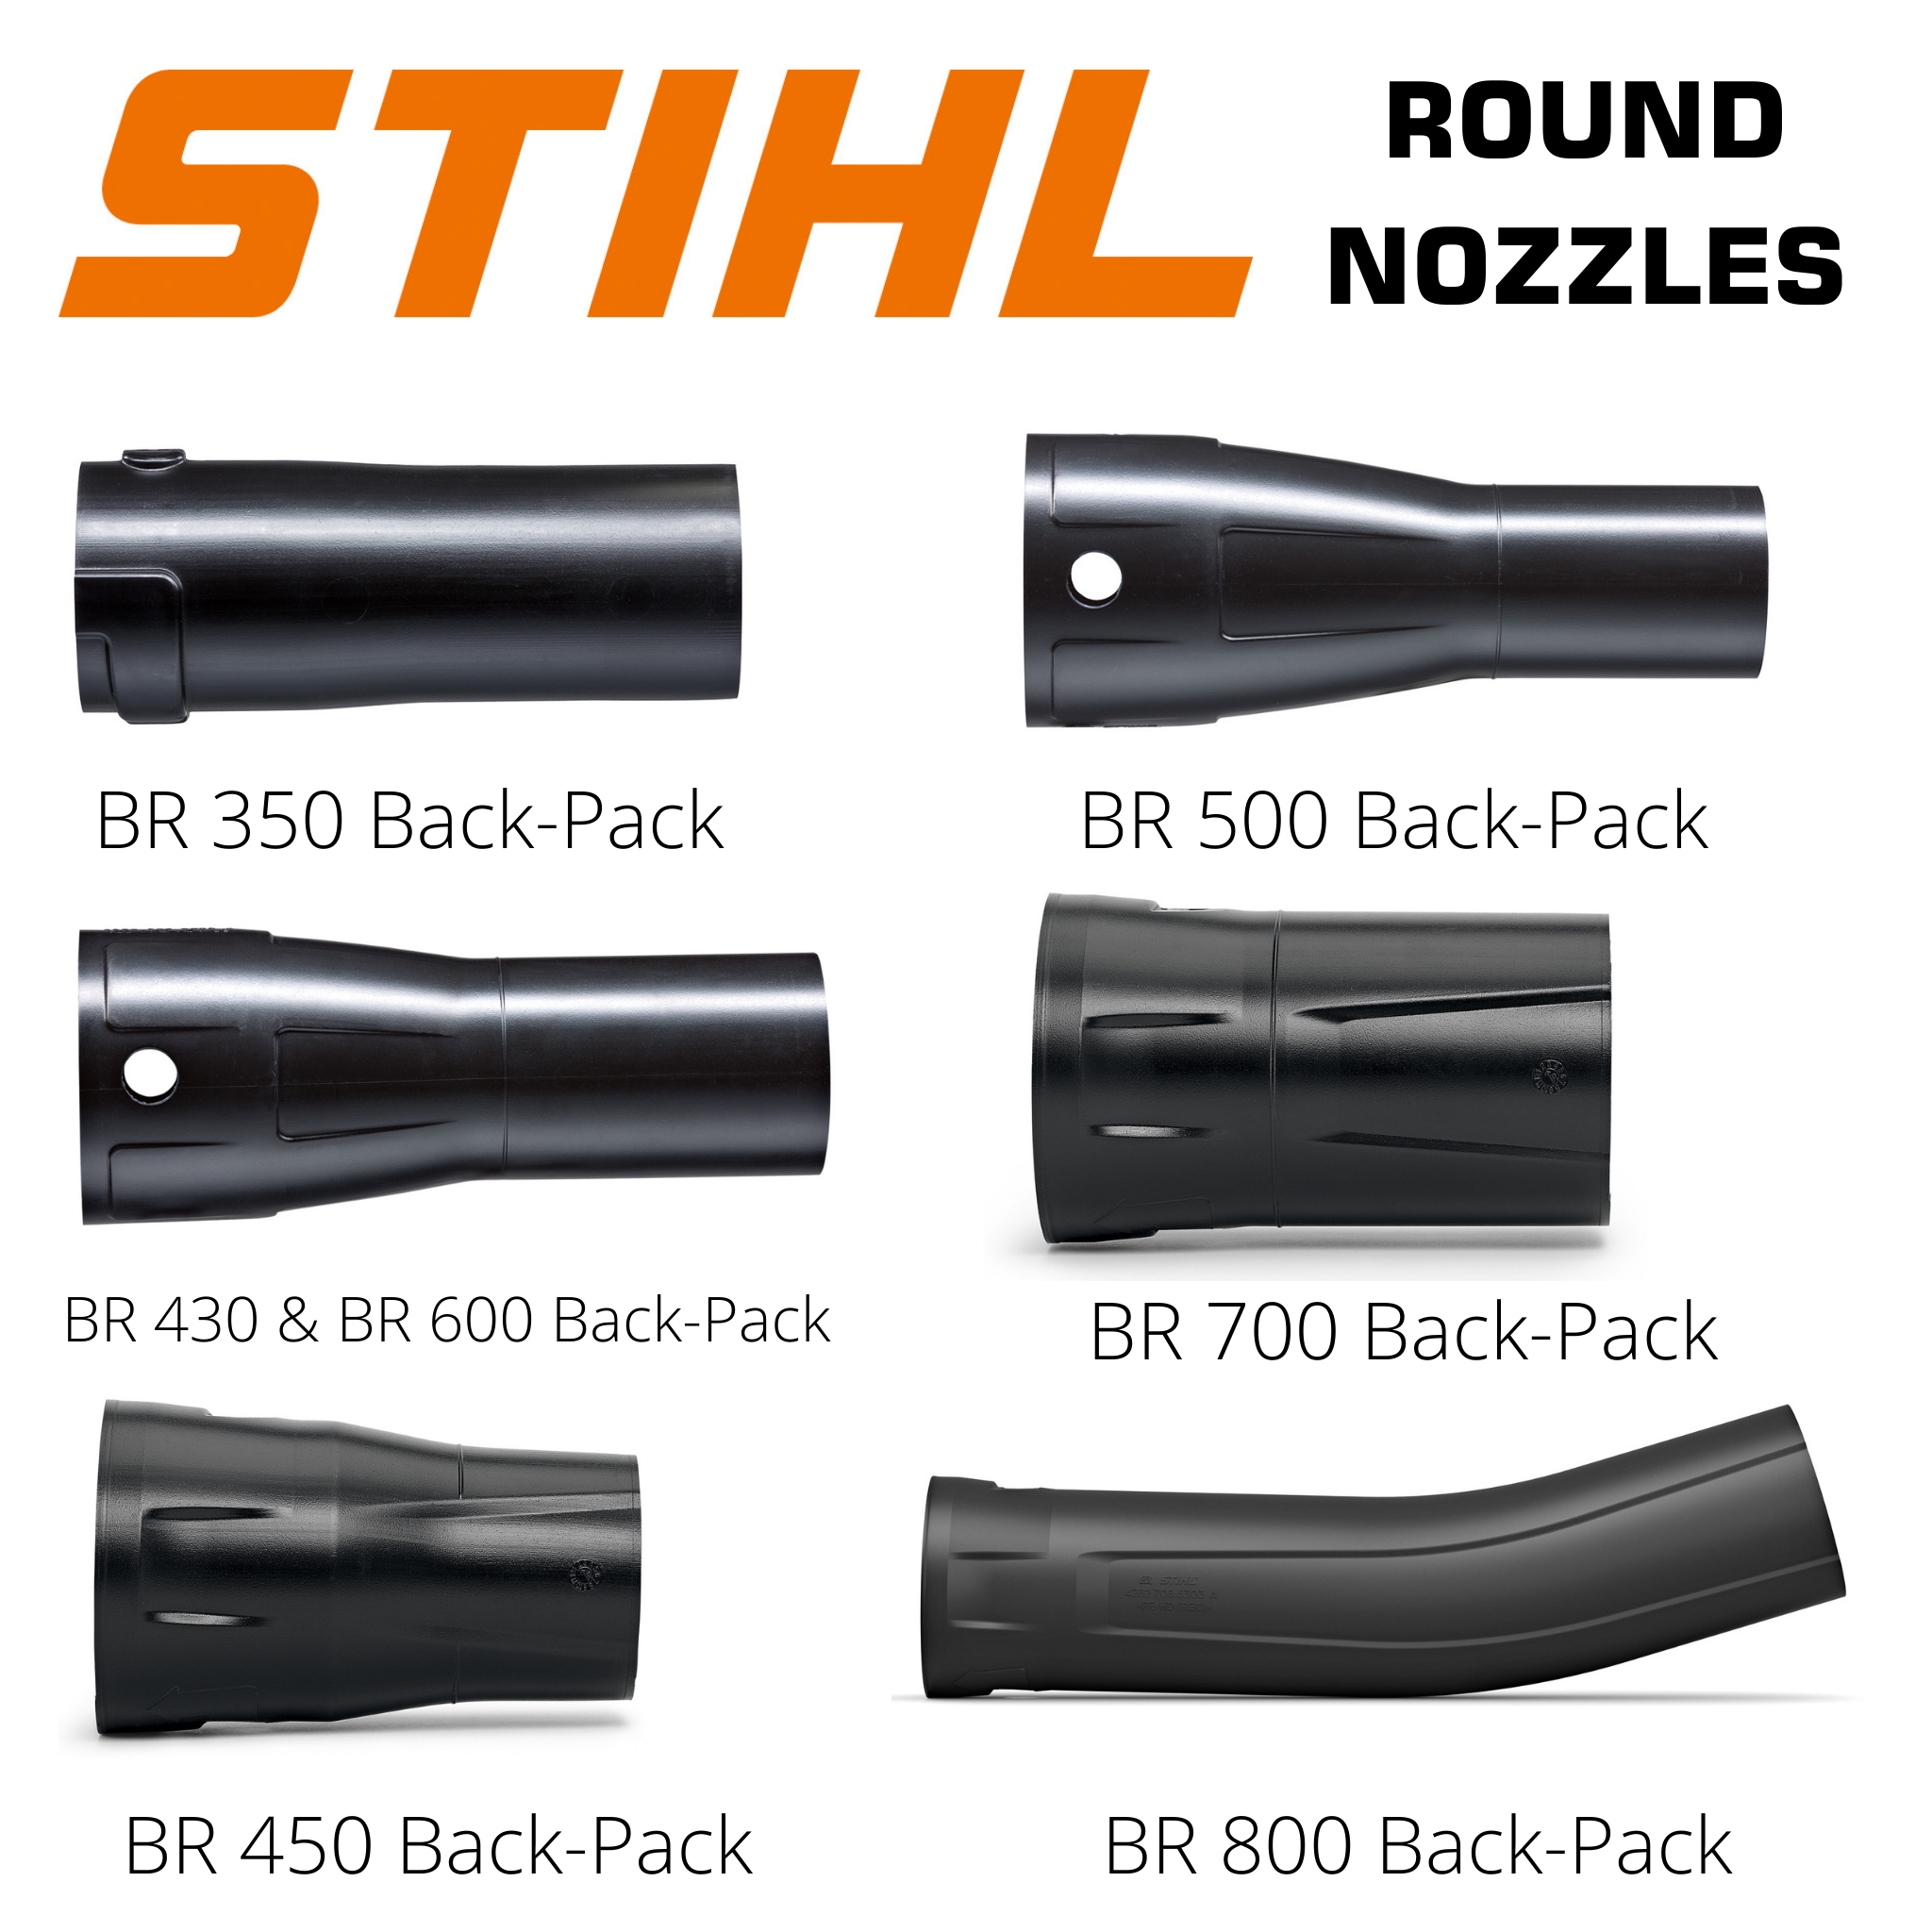 Round nozzles for Stihl leaf blowers